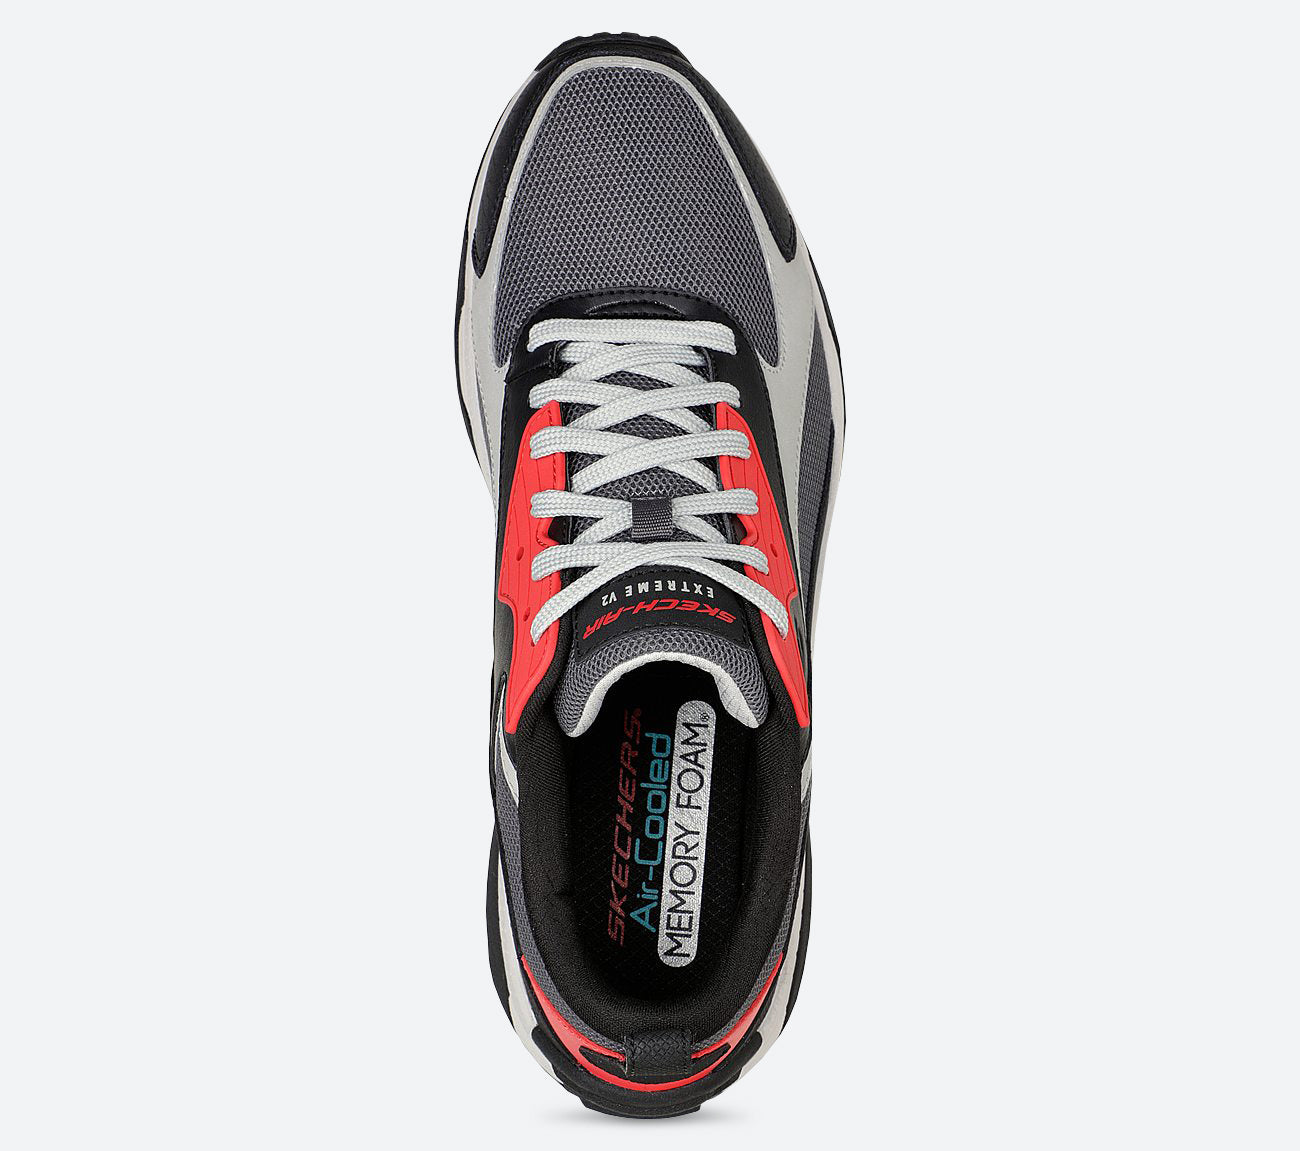 Skech-Air Extreme V2 - Water Repellent Shoe Skechers